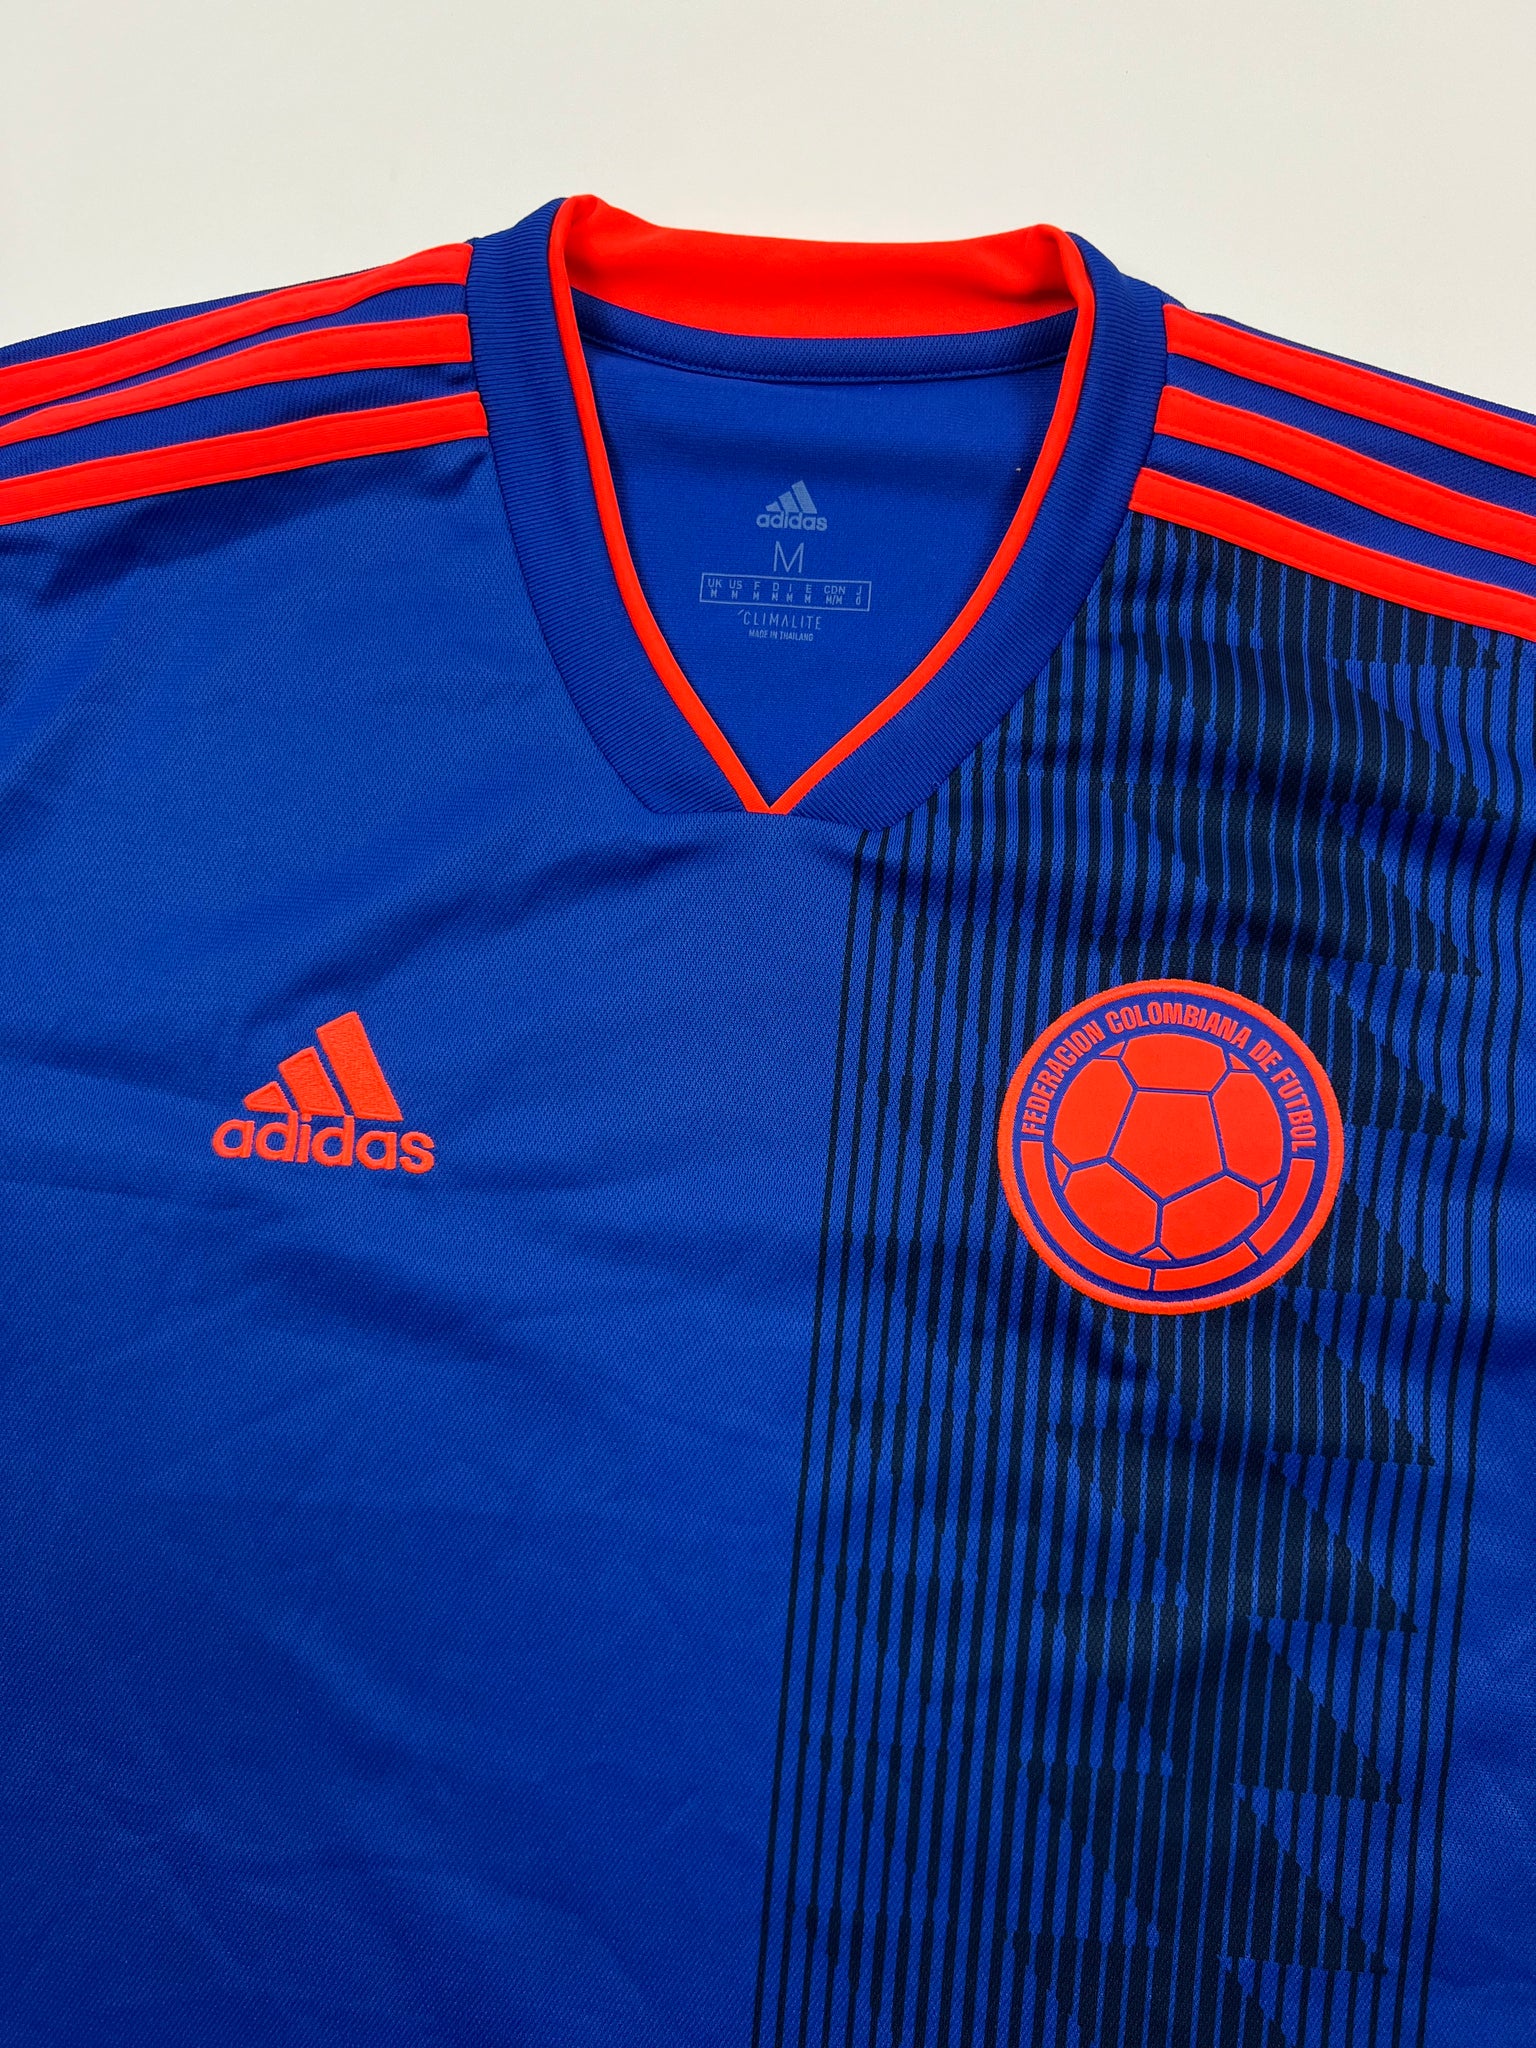 Adidas Colombia Jersey (M)